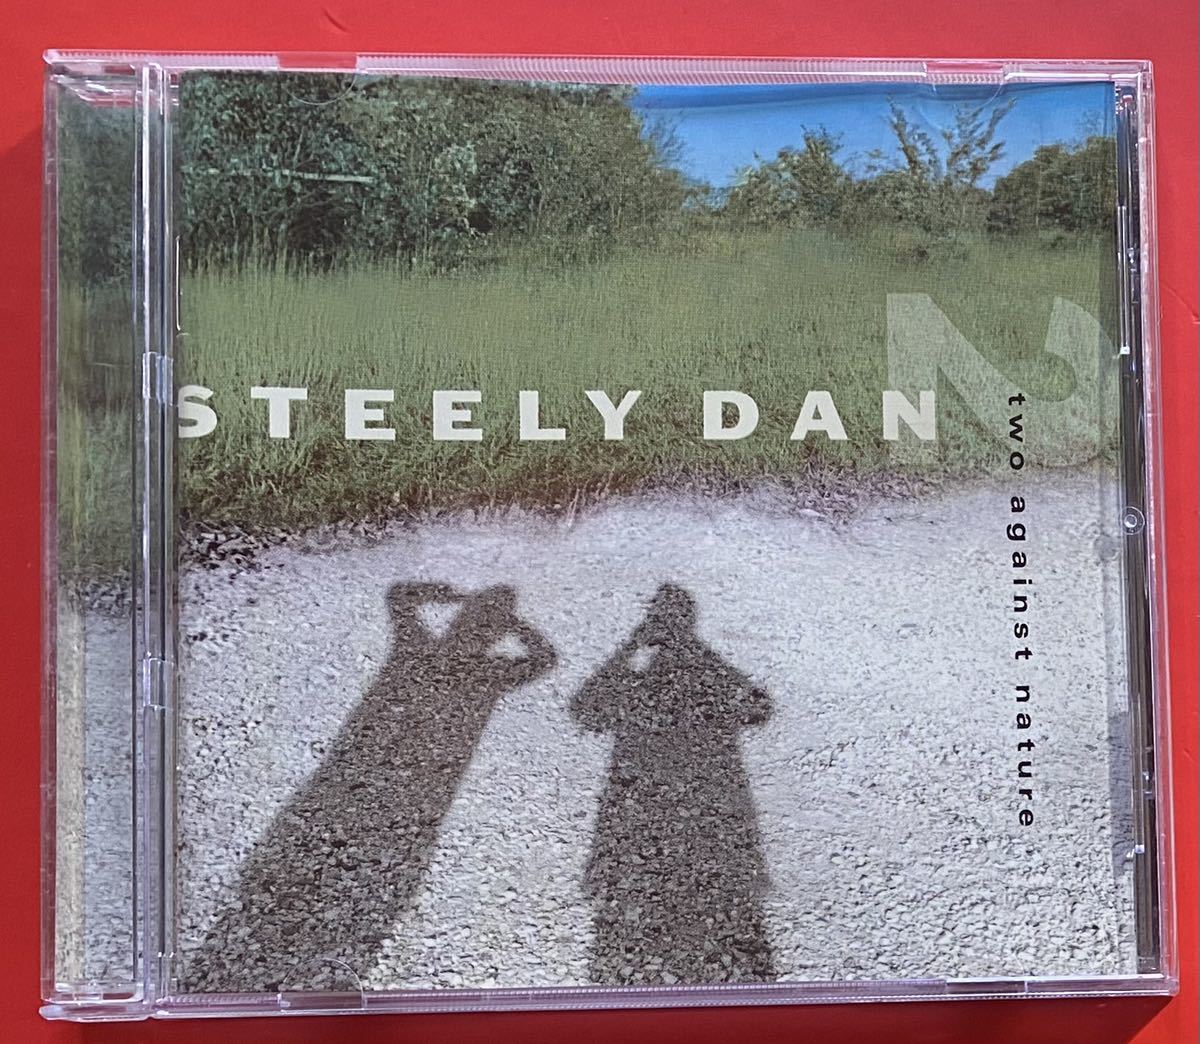 【CD】Steely Dan「Two Against The Nature」スティーリー・ダン 輸入盤 [1026]_画像1